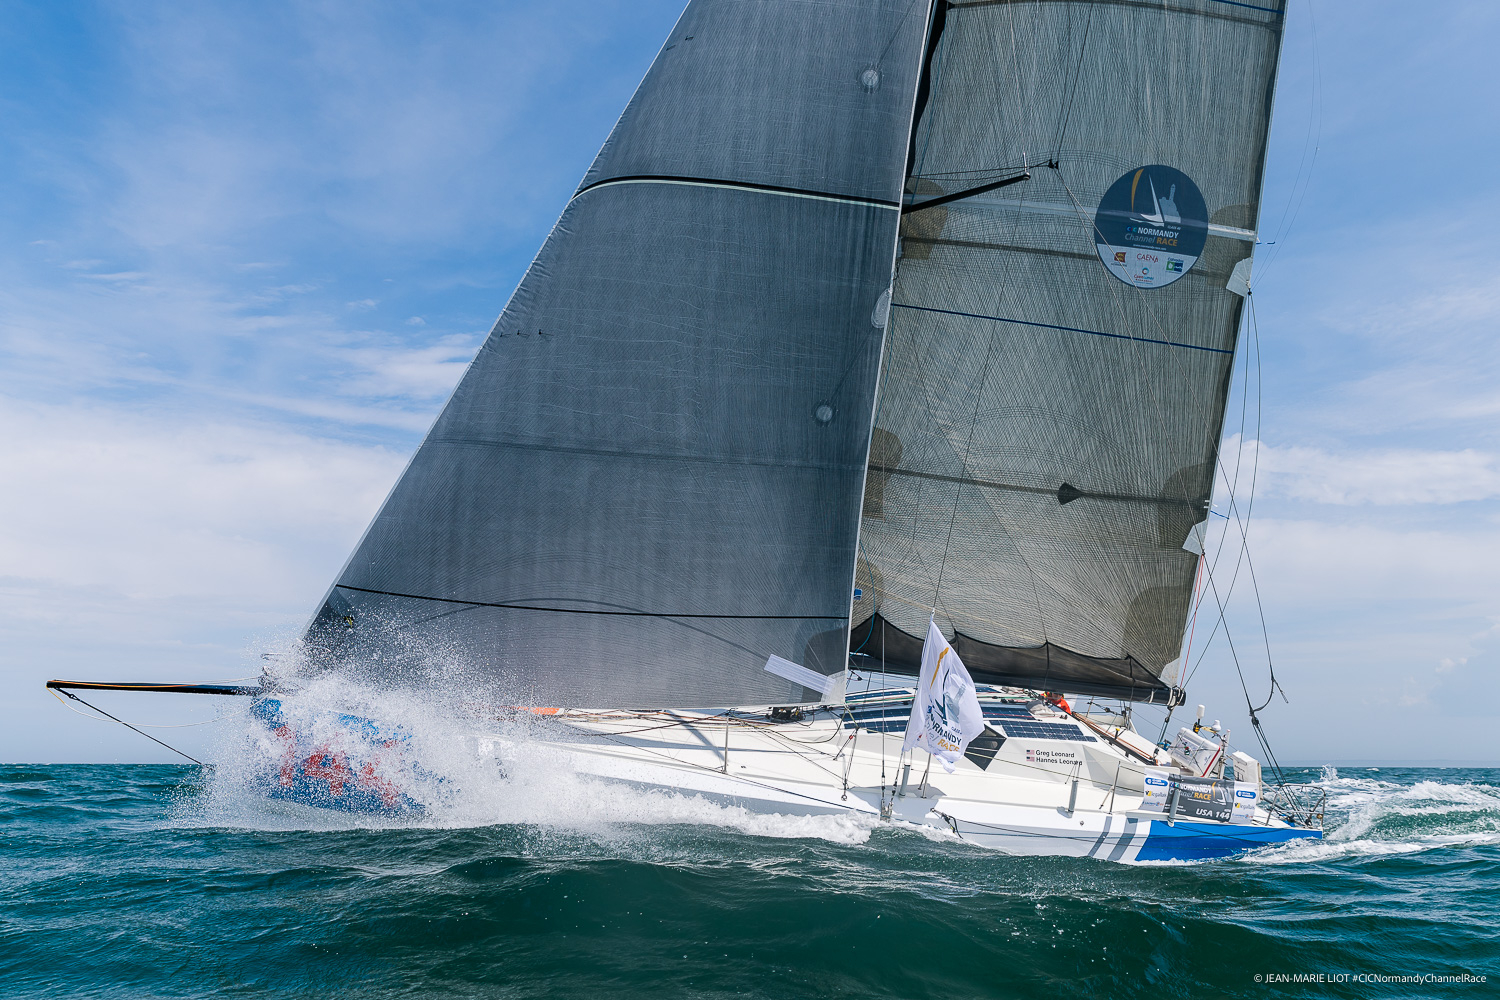  Class 40  Normandy Channel Race  Ouistreham FRA  Day 2